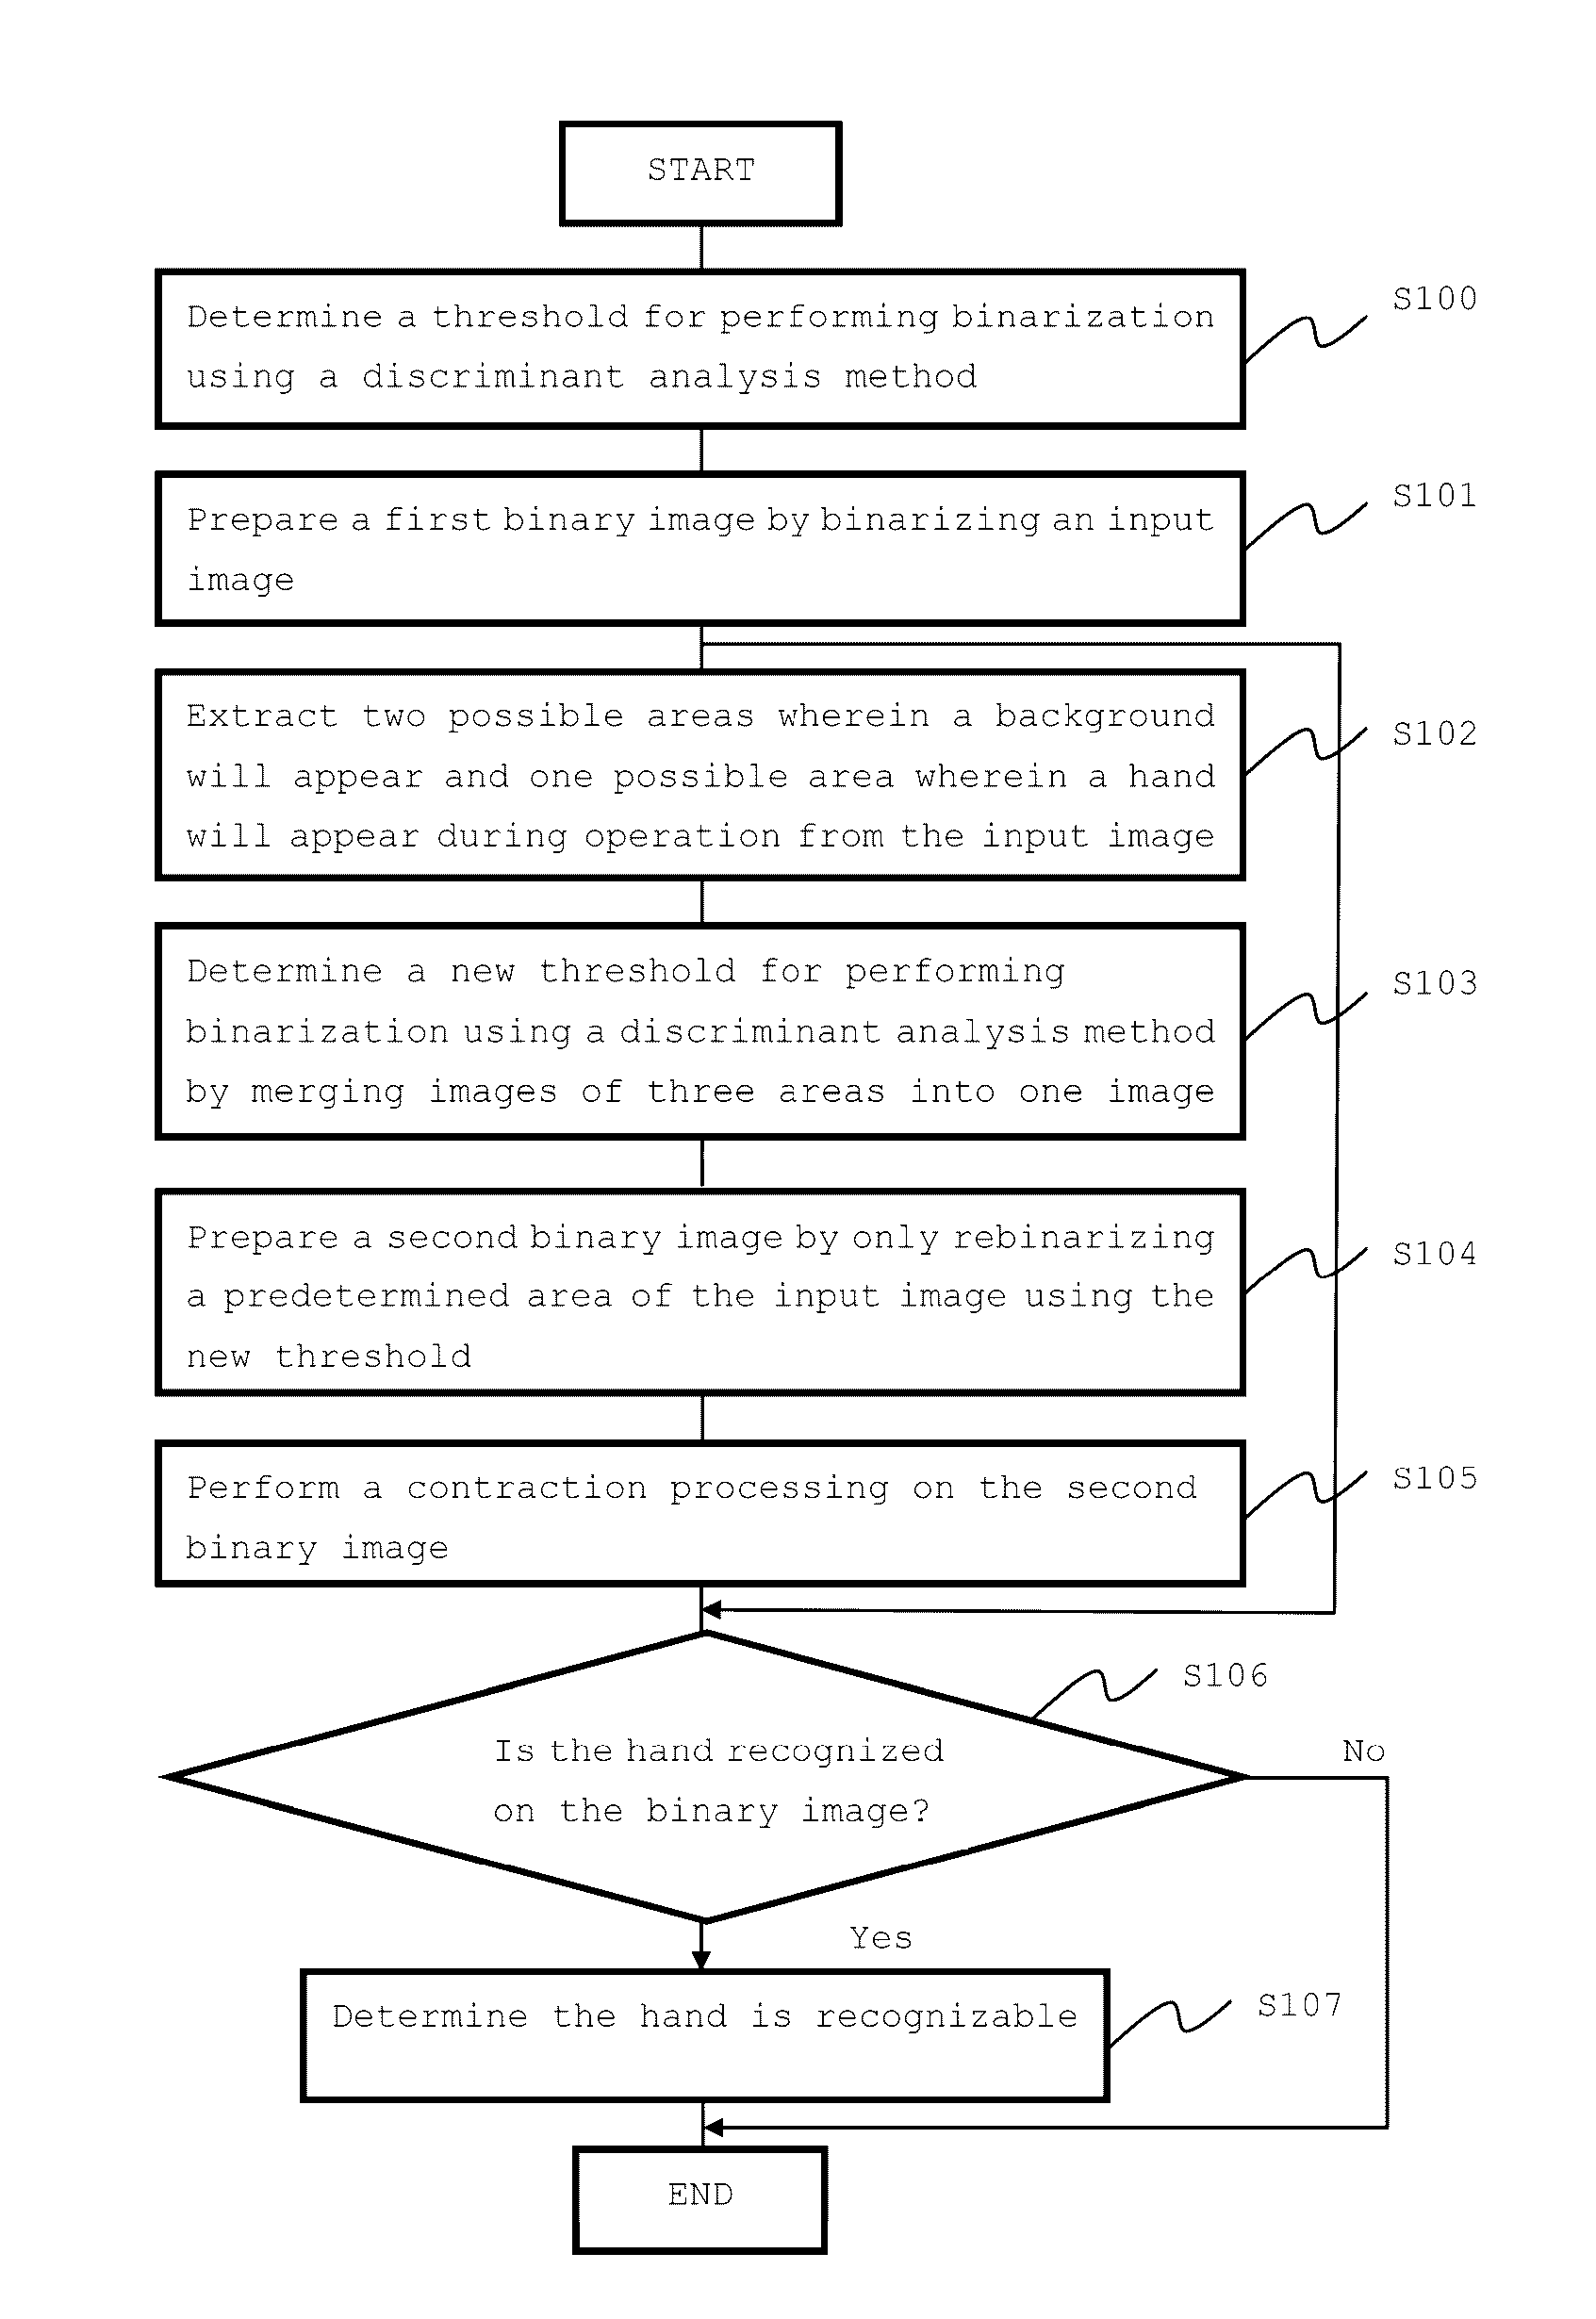 Gesture recognition apparatus using vehicle steering wheel, and method for recognizing hand